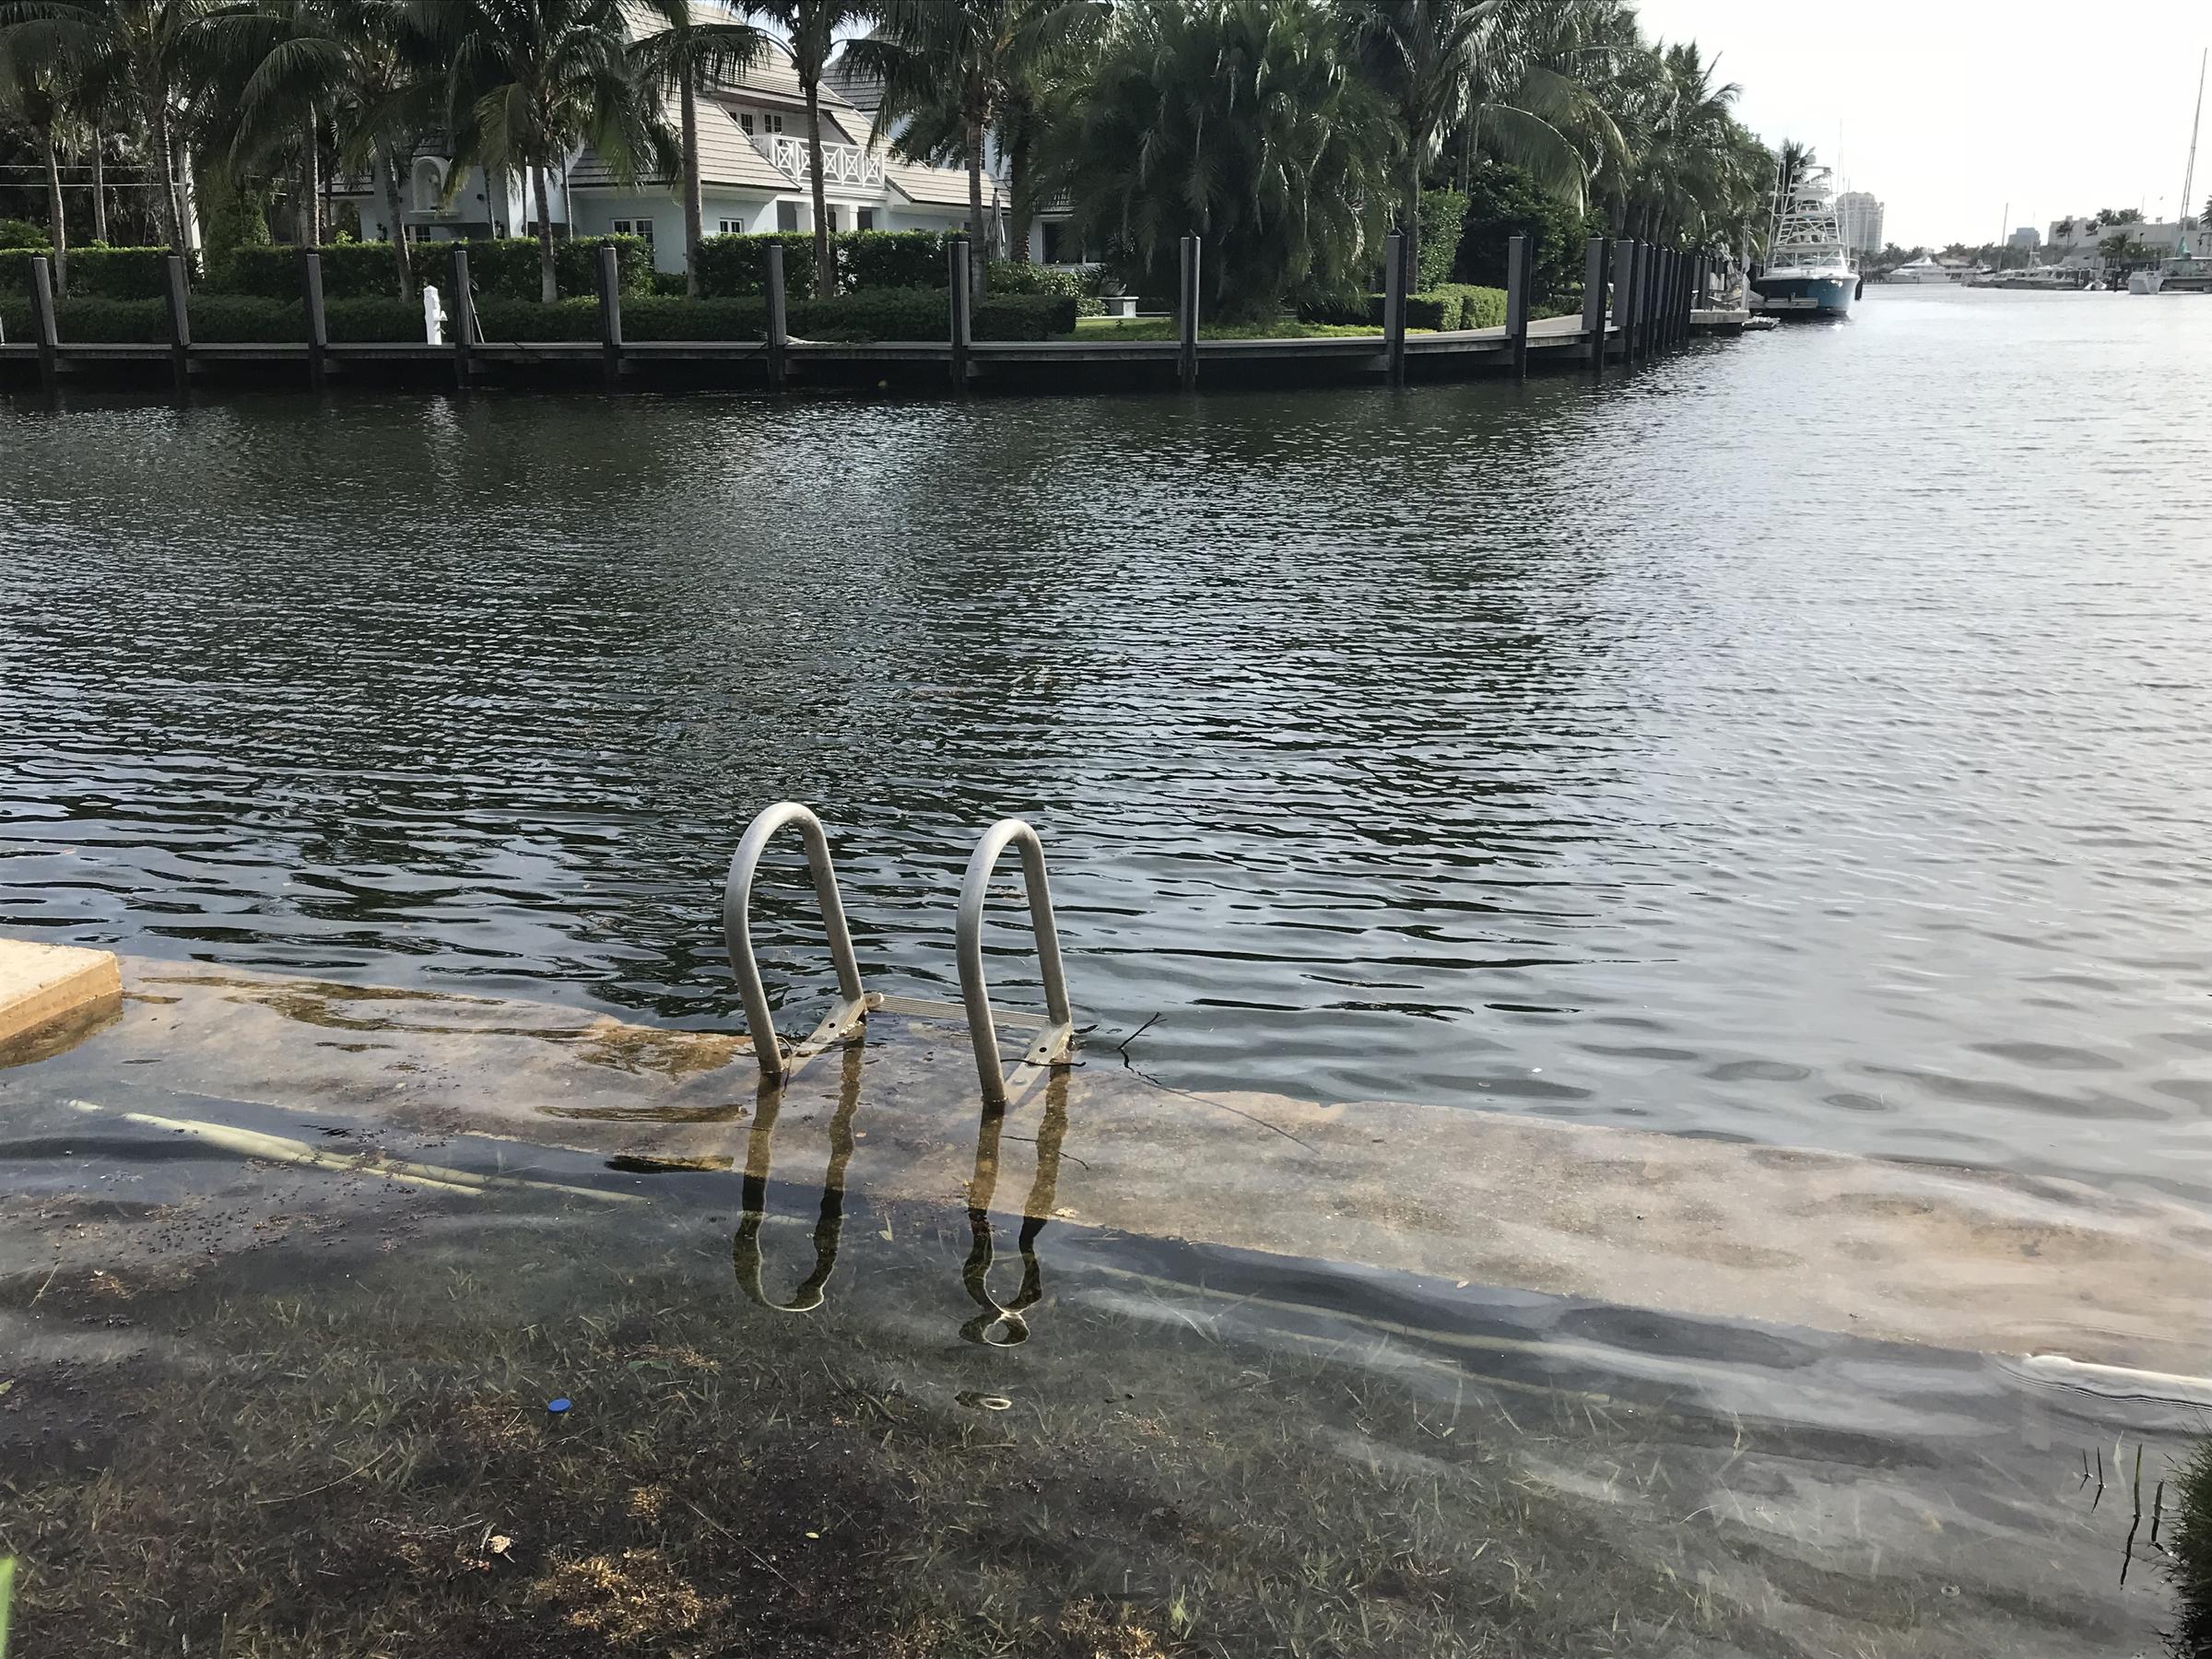 King Tide Gives South Florida A Taste Of Life Underwater The Invading Sea